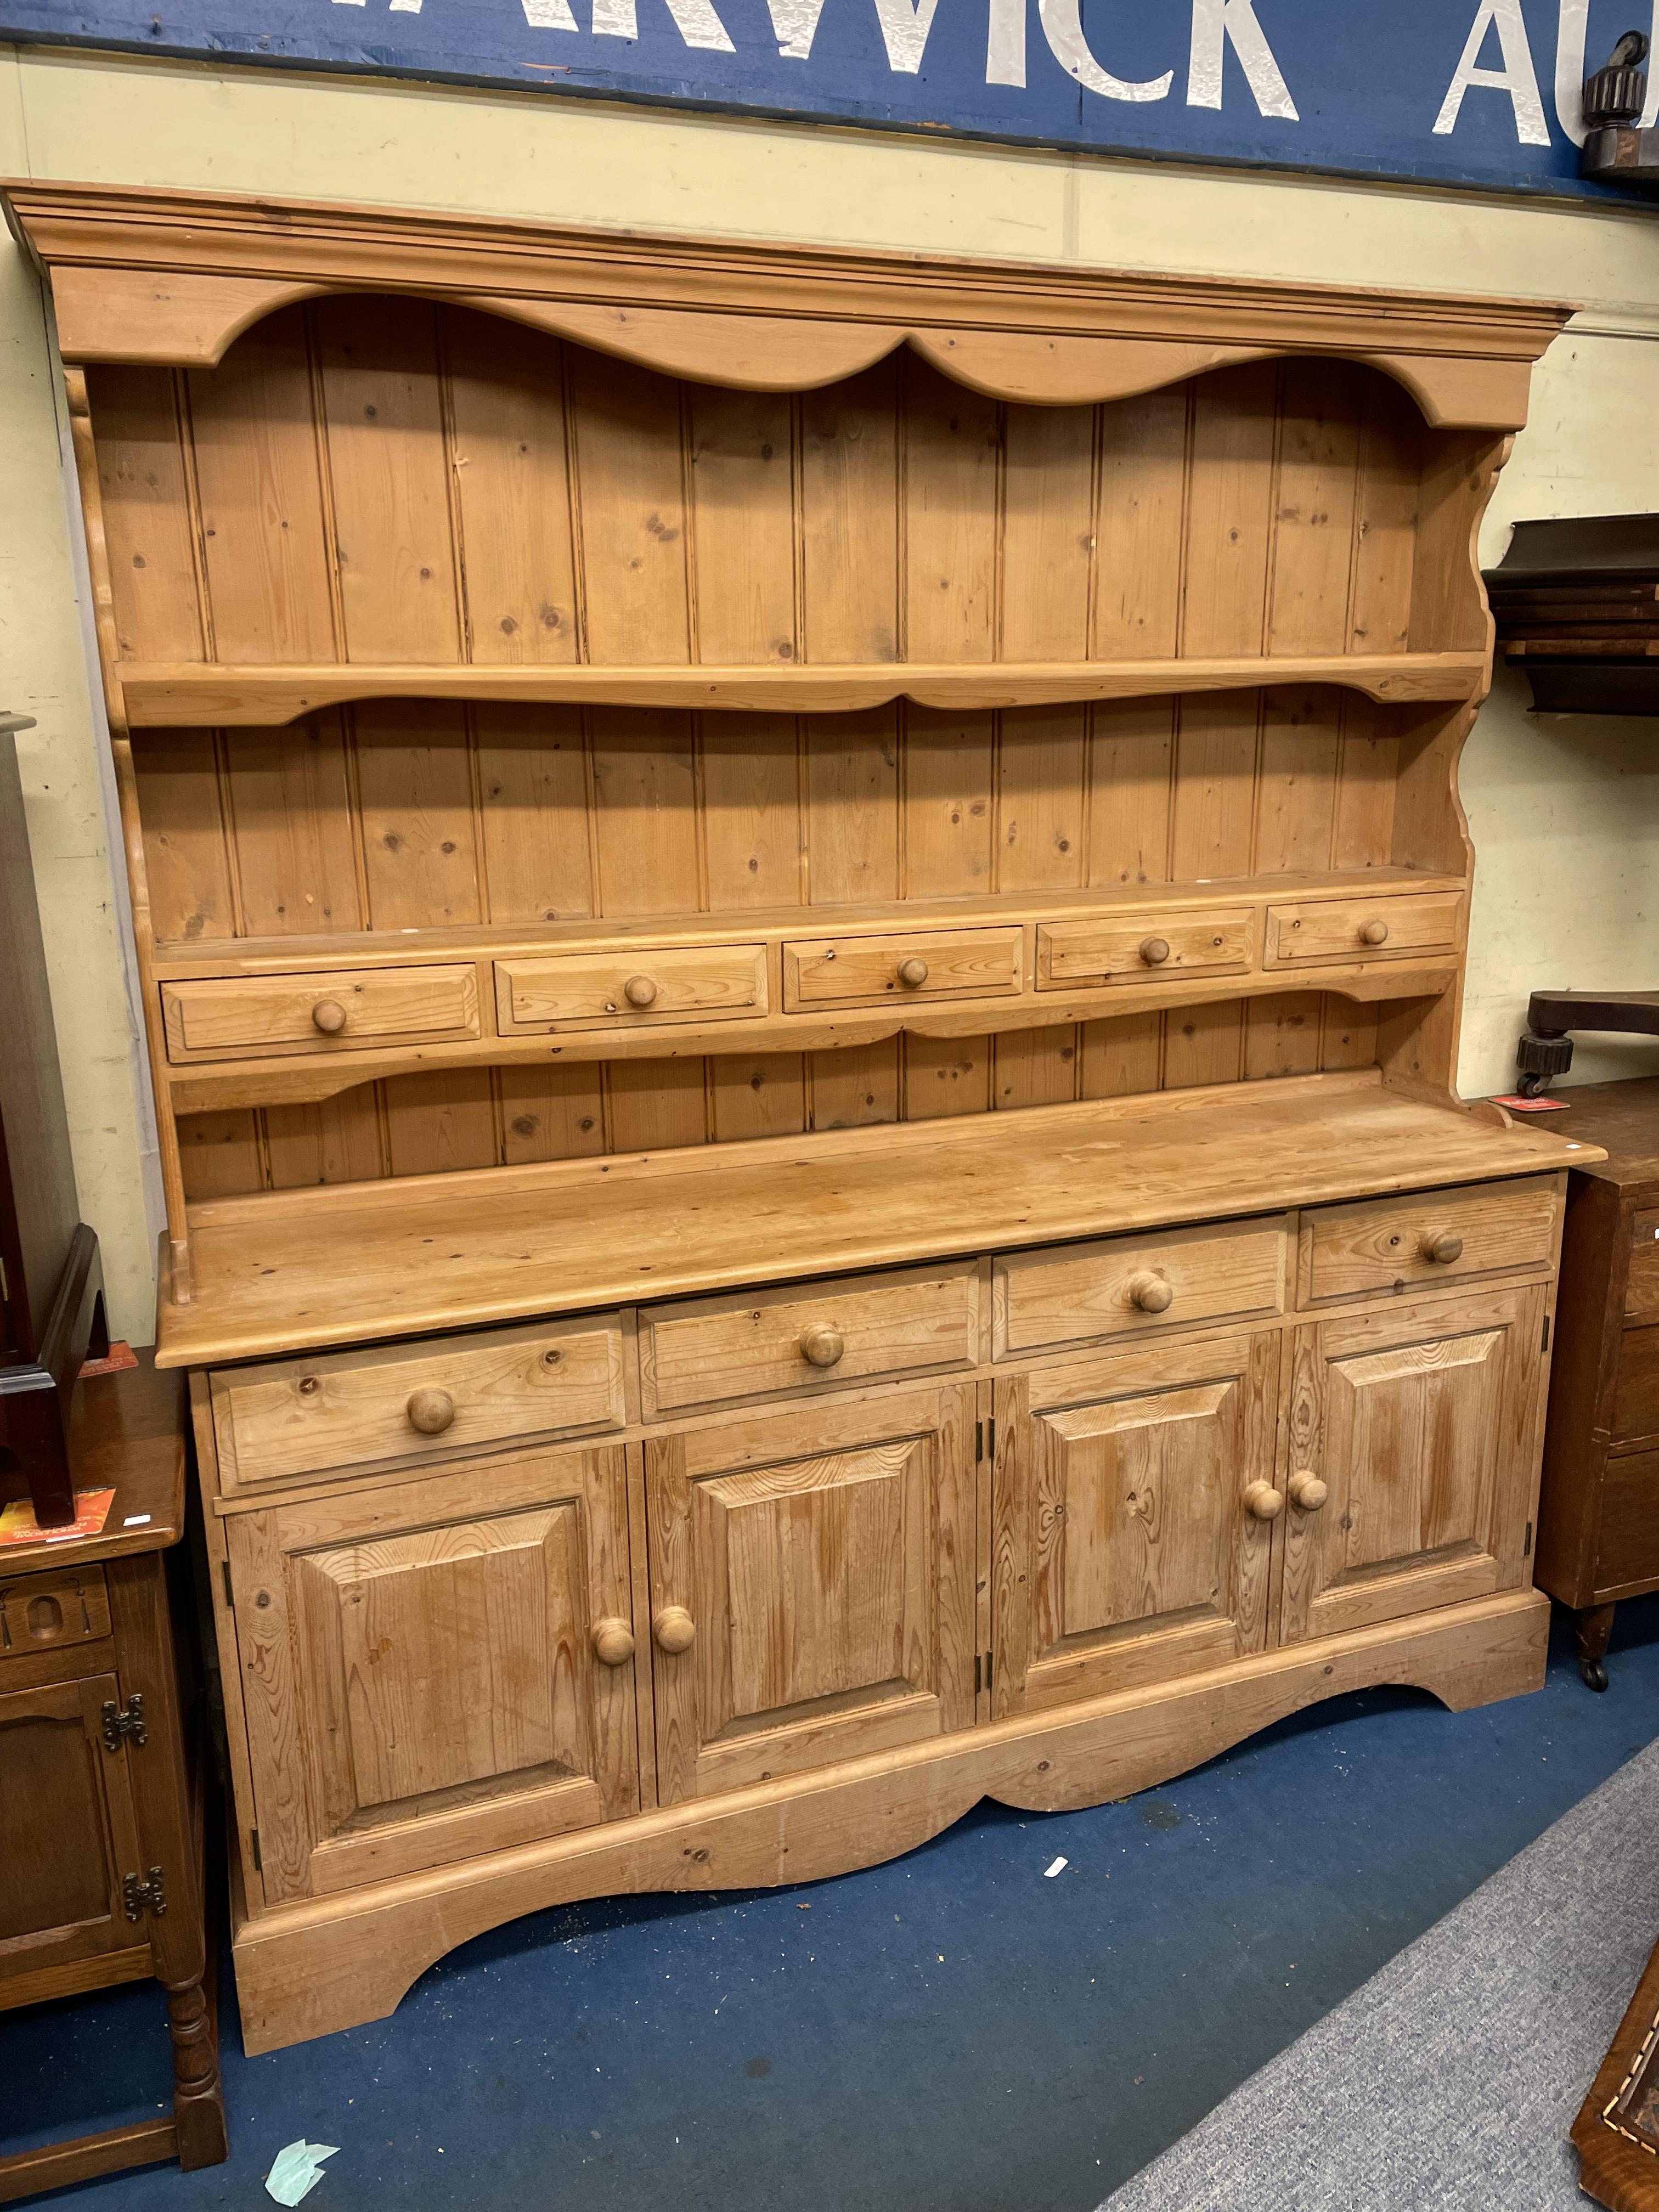 GOOD QUALITY PINE FARMHOUSE STYLE DRESSER WITH ENCLOSED RACK FITTED WITH DRAWERS - Image 3 of 6